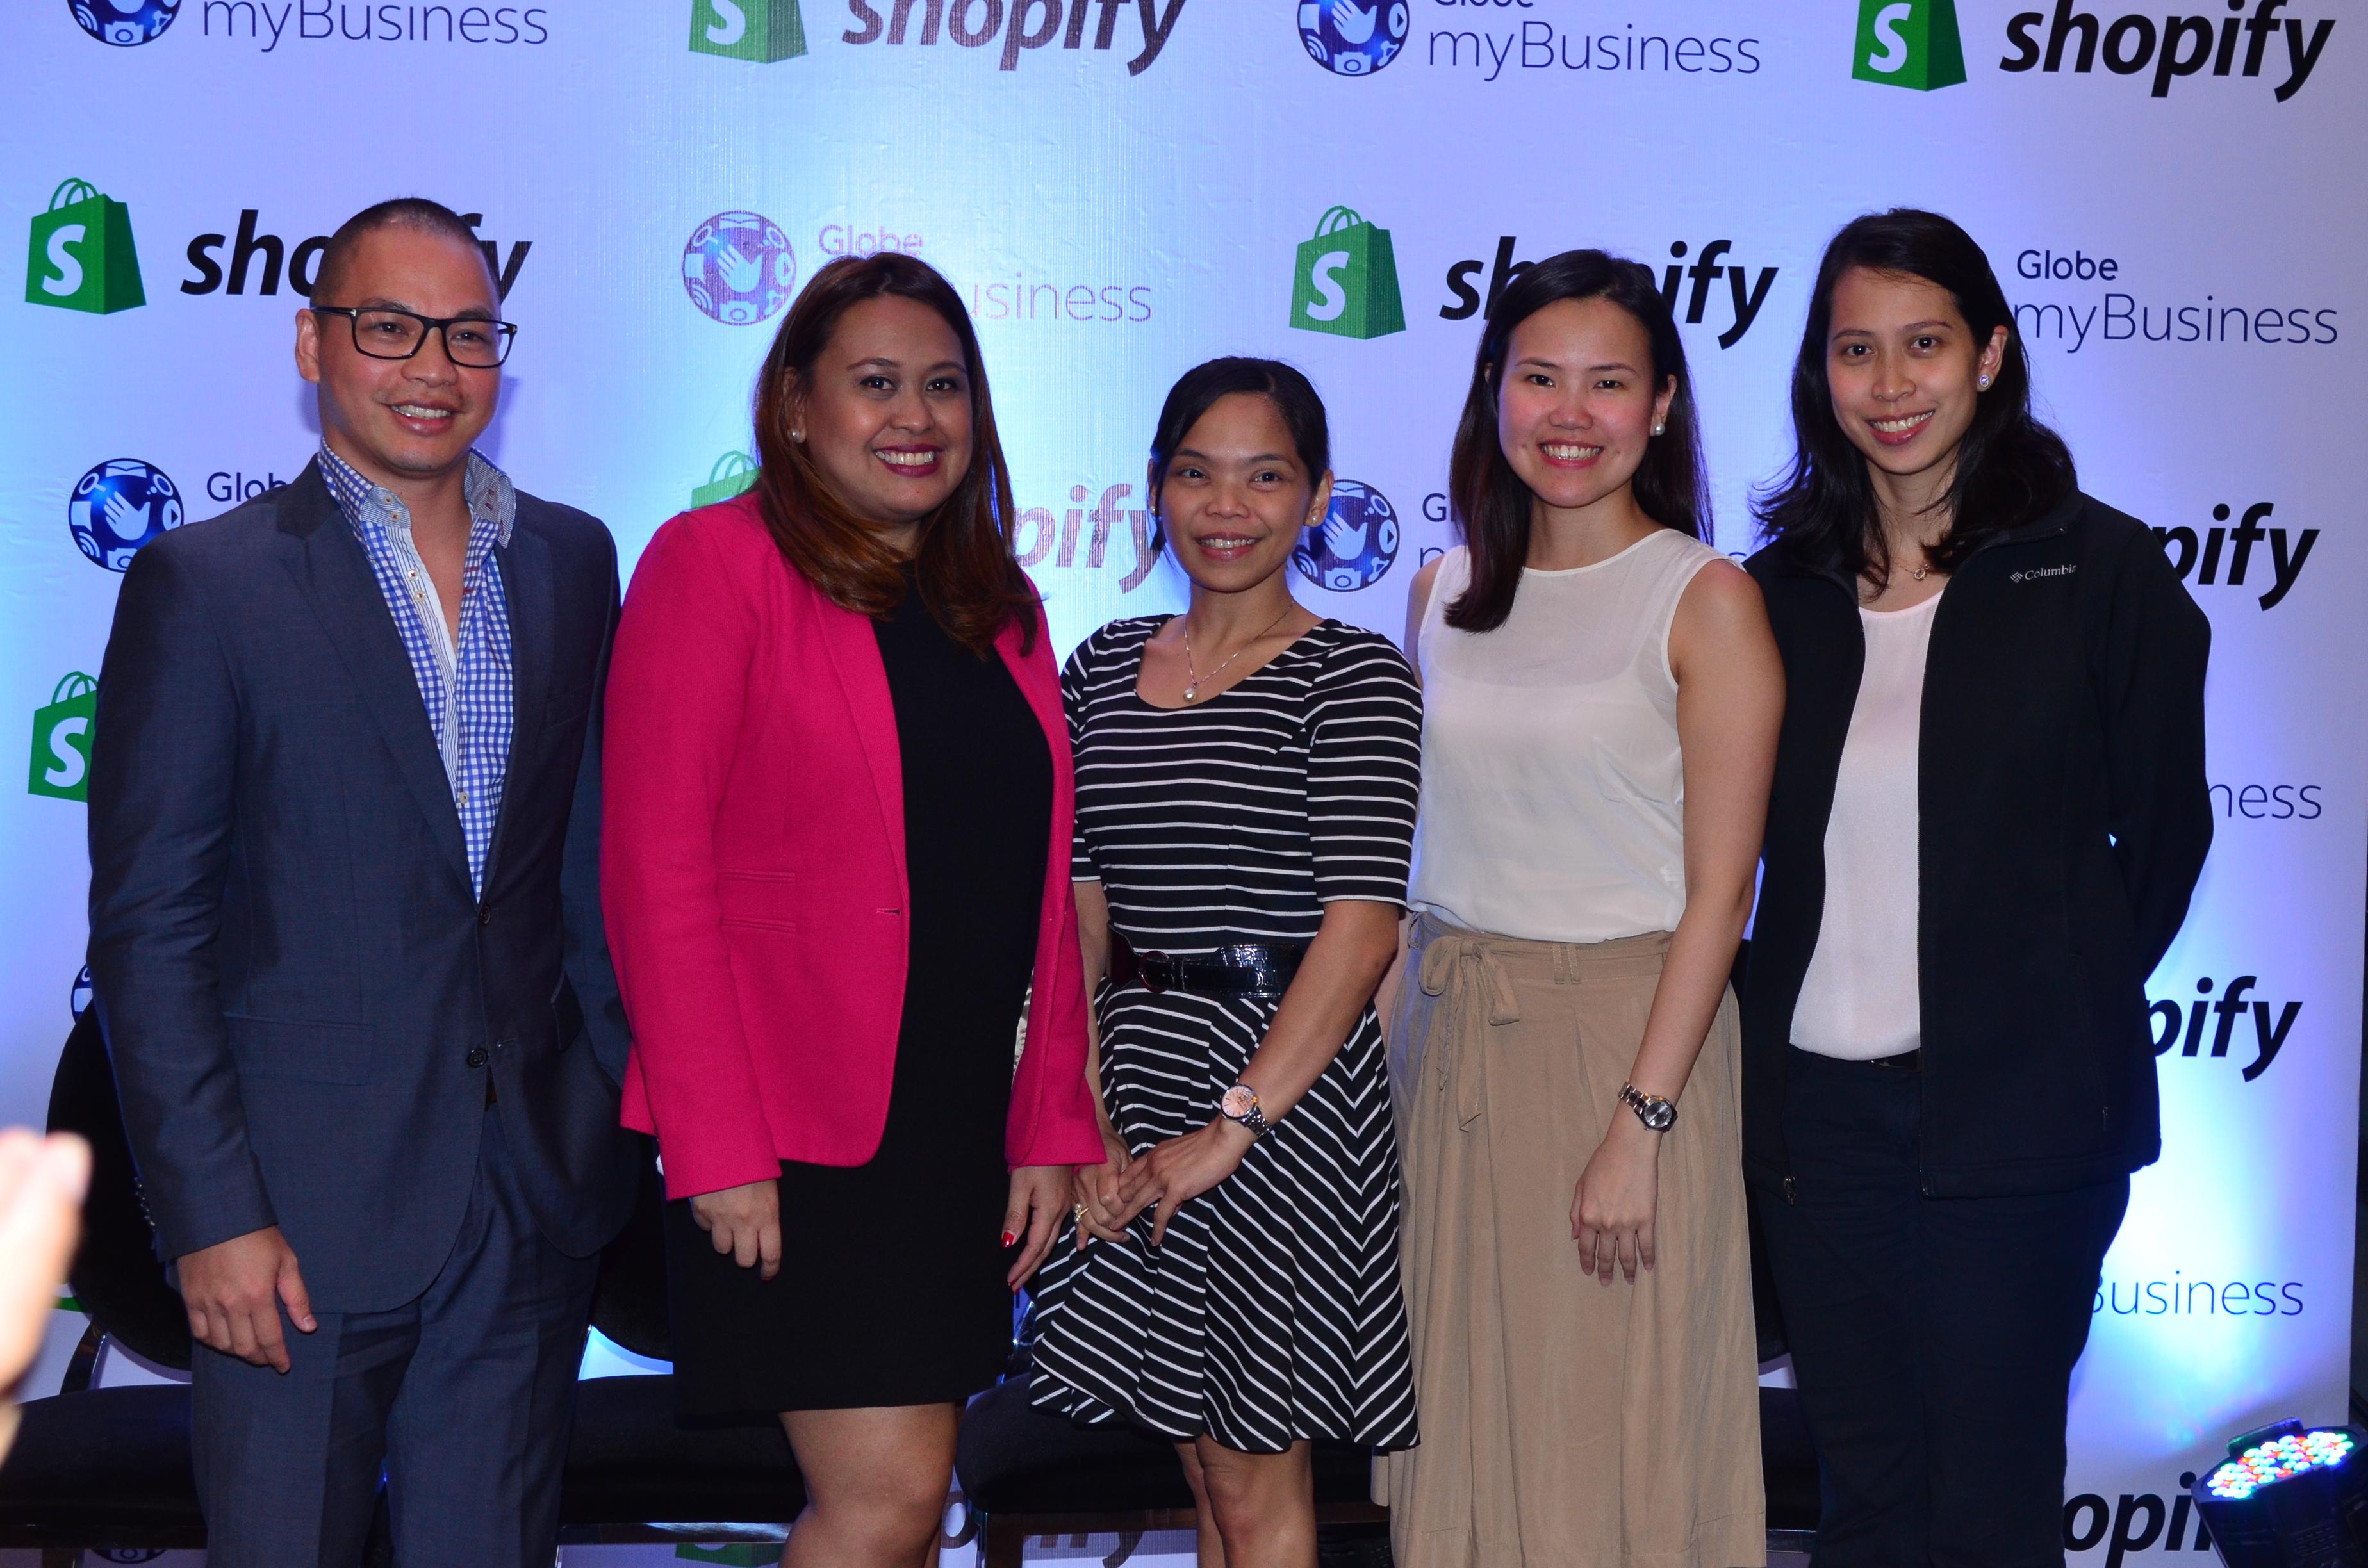 (L-RO Shopify's Kristian Salvo, Globe myBusiness VP for Marketing and Solutions Innovations  Debbie Obias, Globe myBusiness VP Barbie Dapul and Solutions Team's Steph Chua and Crissie Ortines.